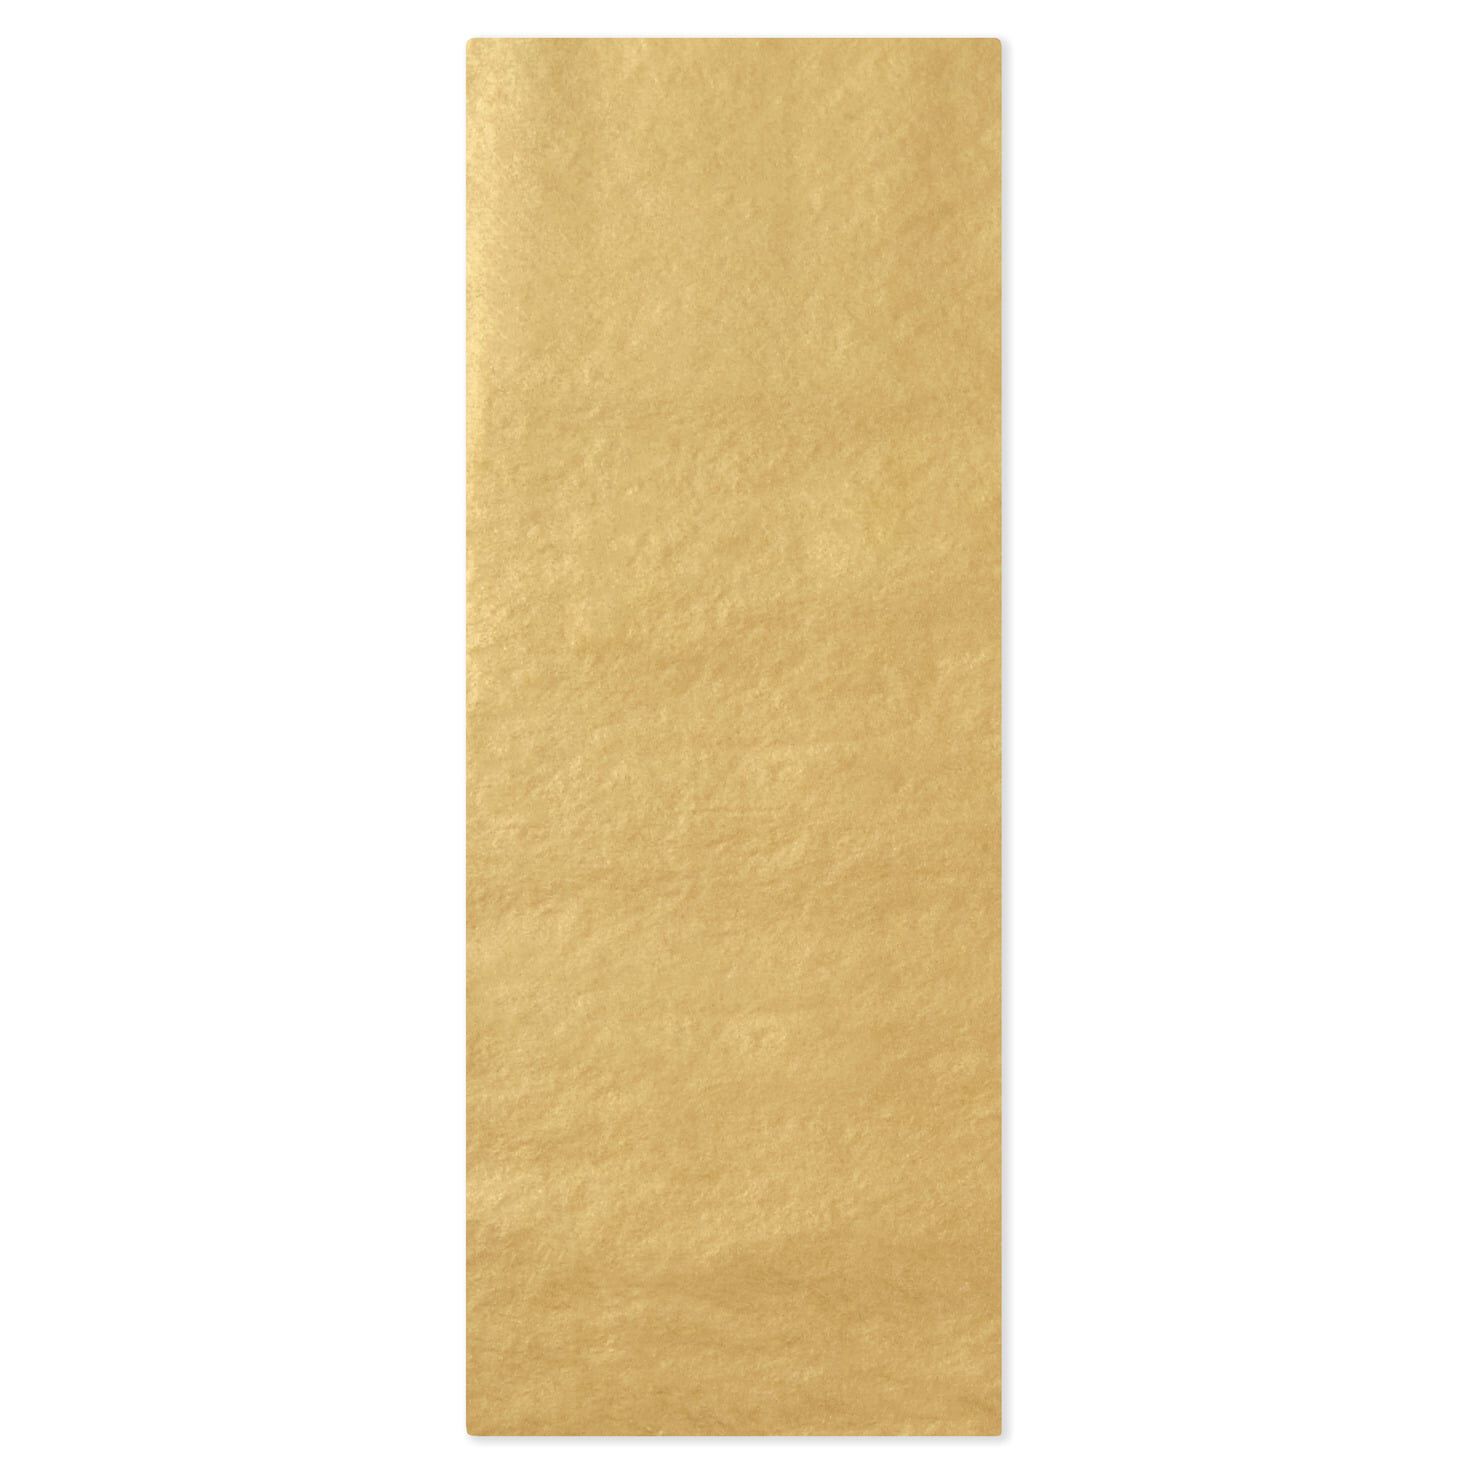 Metallic Tissue Paper in Gold - 4 Sheets Included